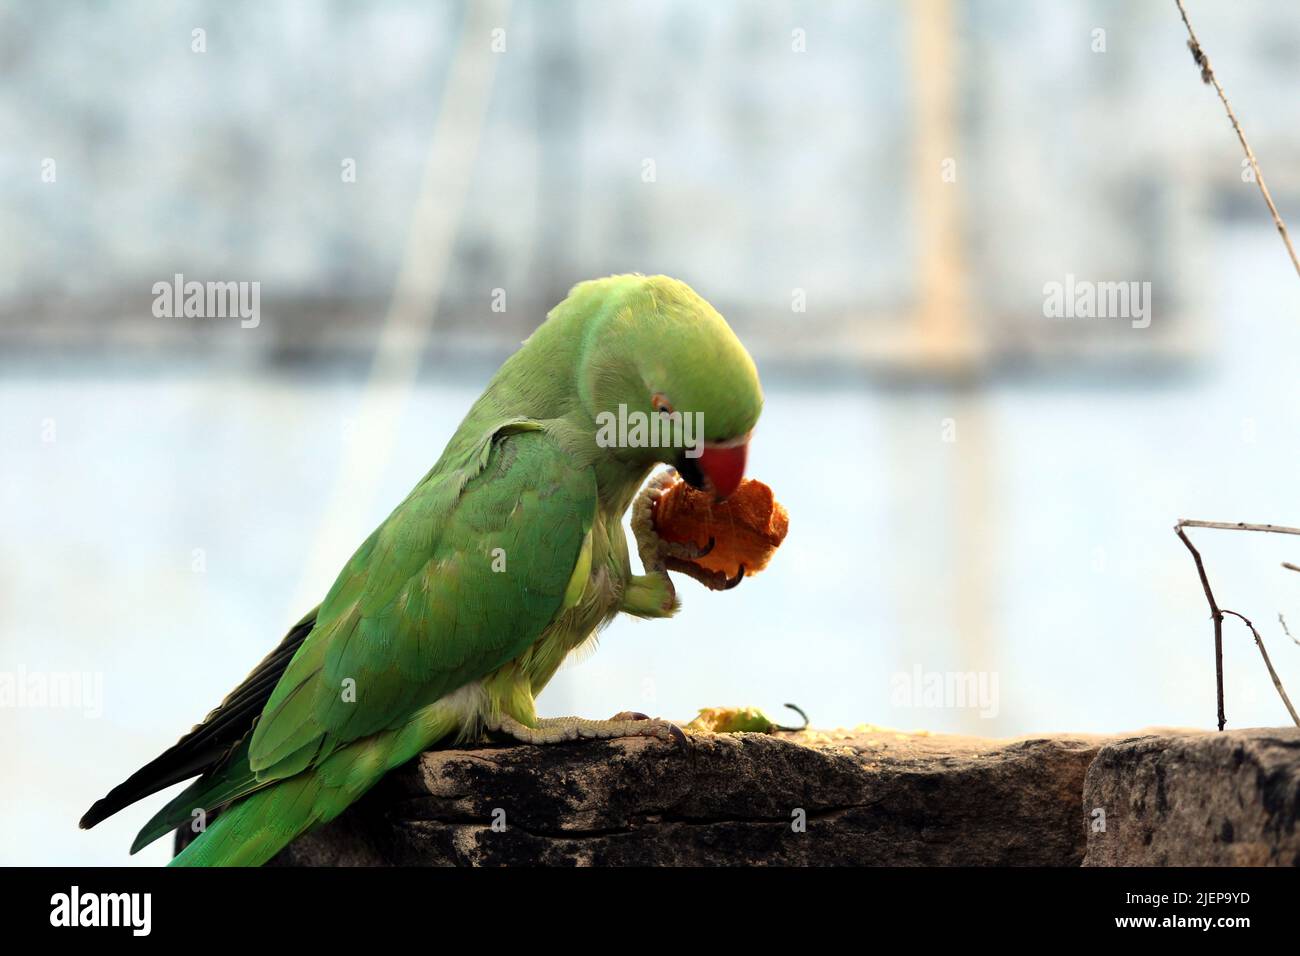 green parrot eating a bread Stock Photo